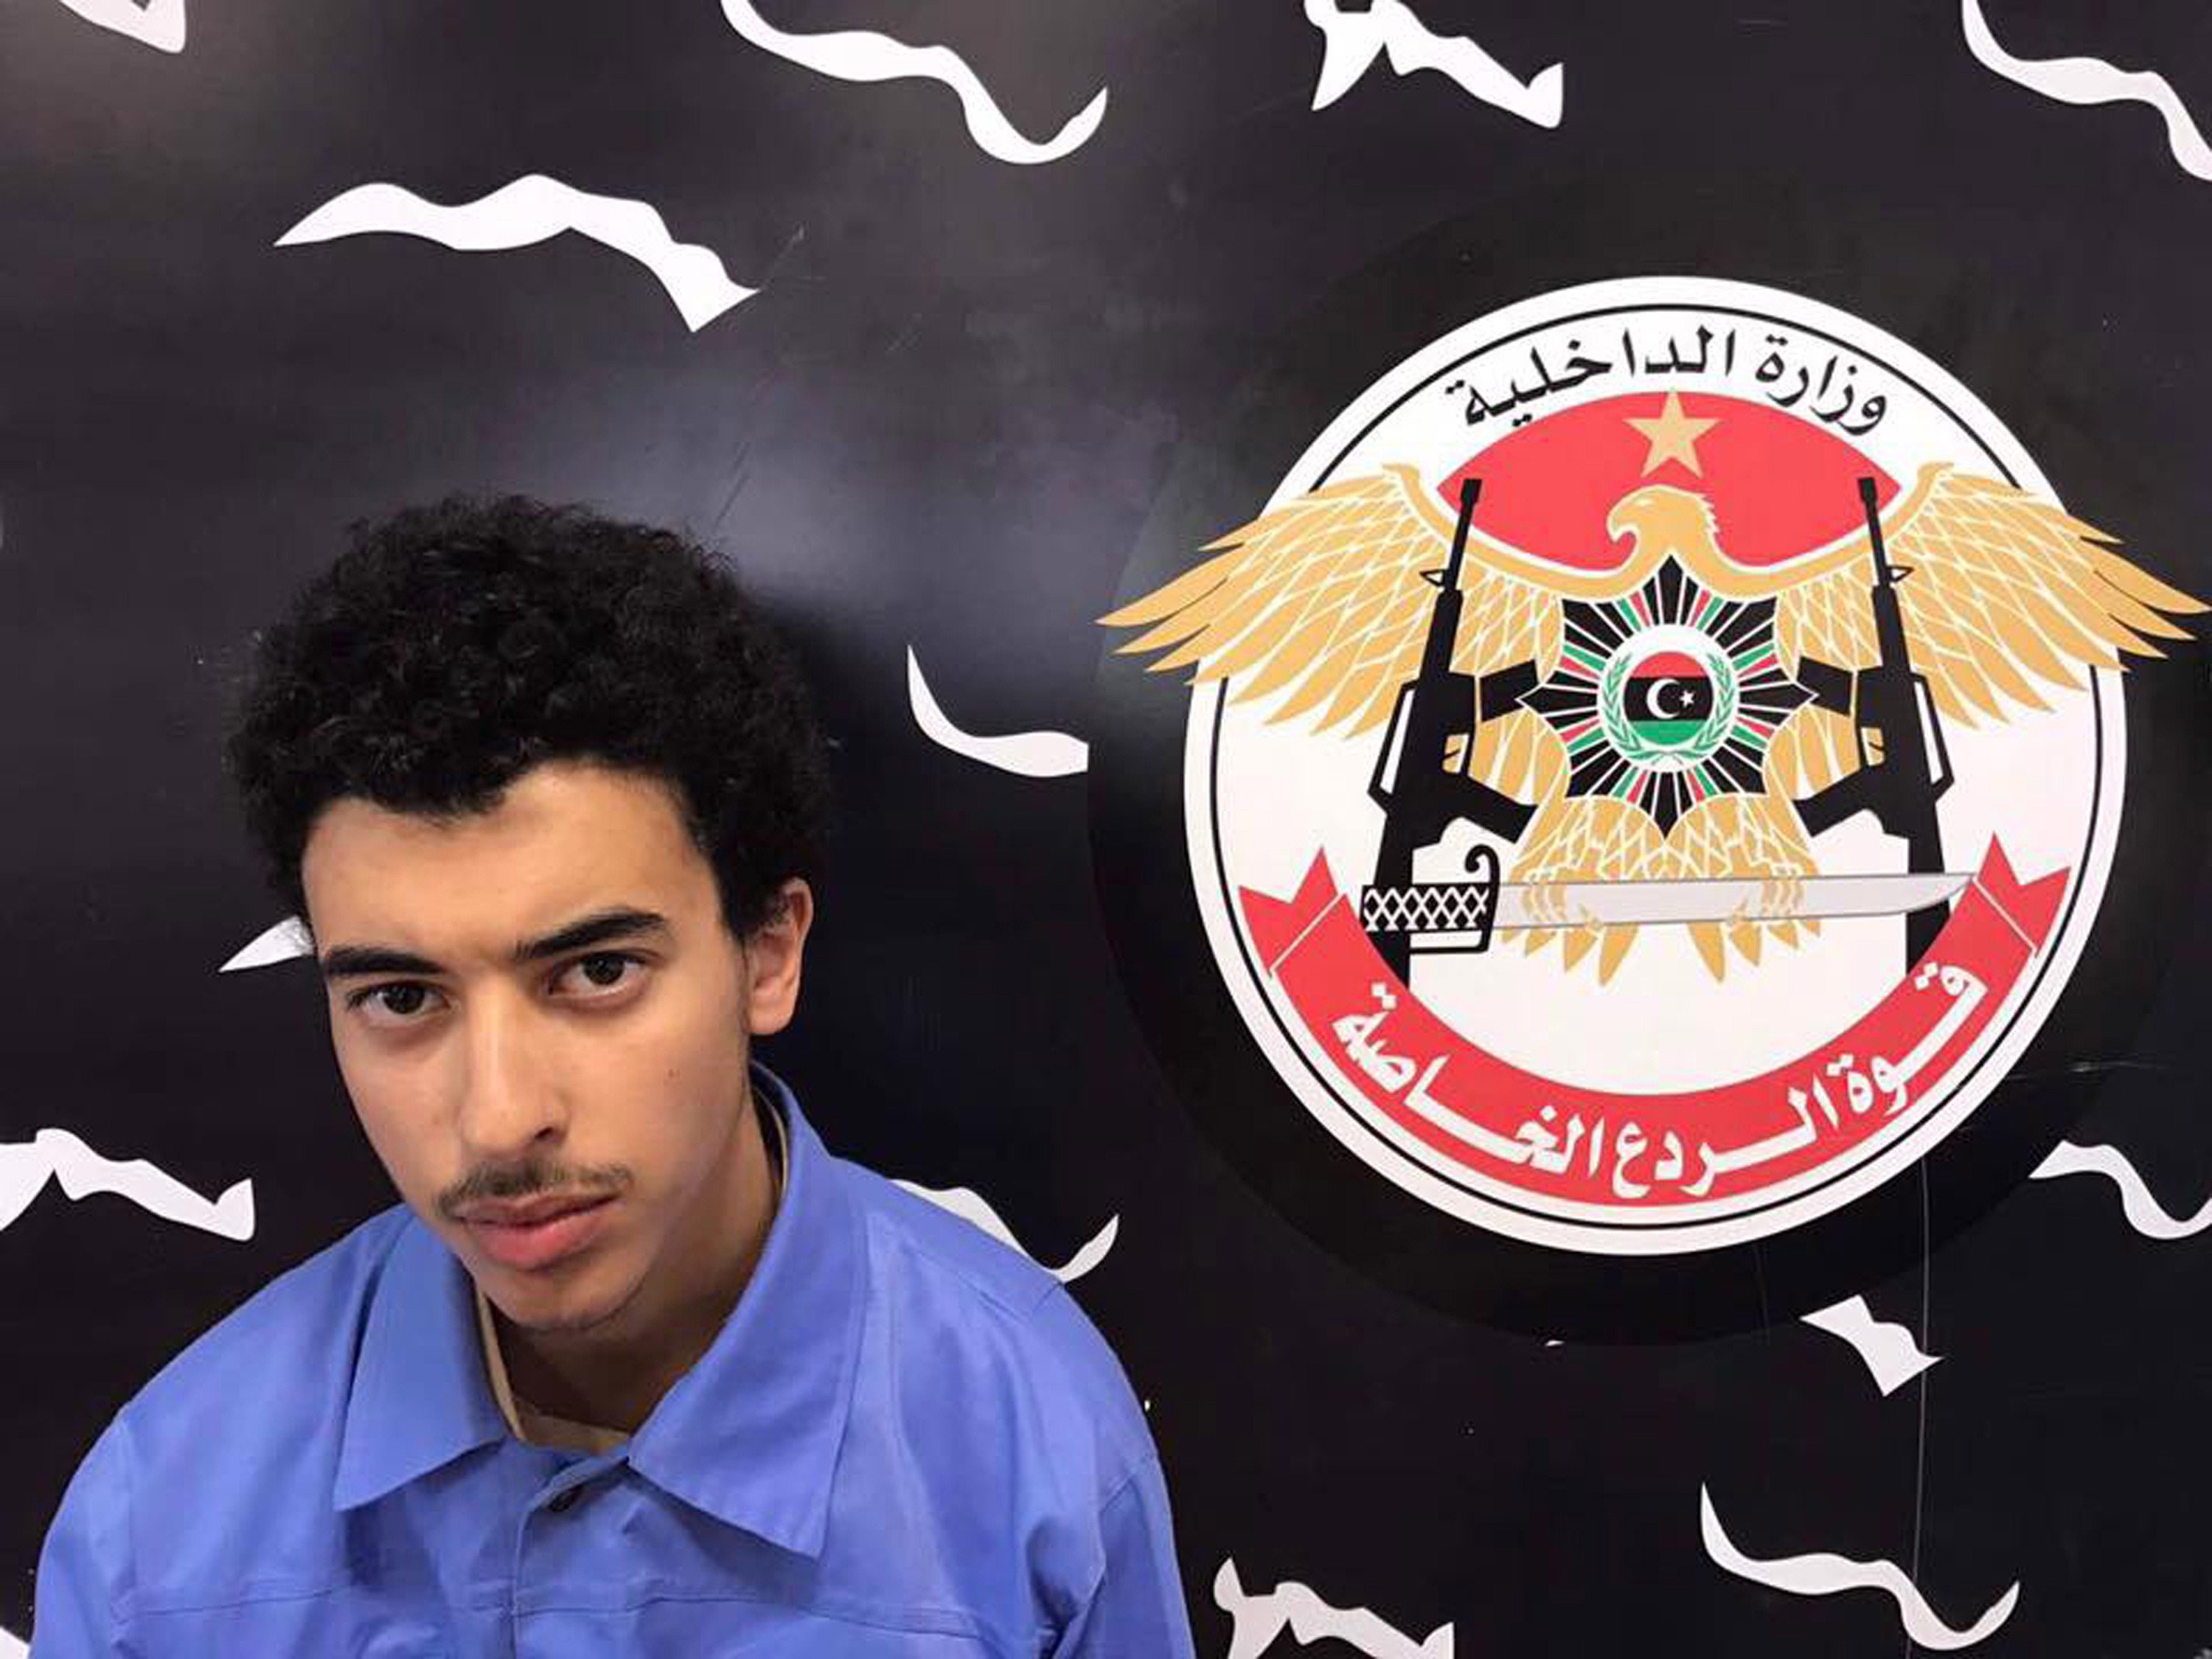 Hashem Abedi, the younger brother of Manchester Arena bomber Salman Abedi after he was arrested in Tripoli, Libya in May 2017. Photo: EPA